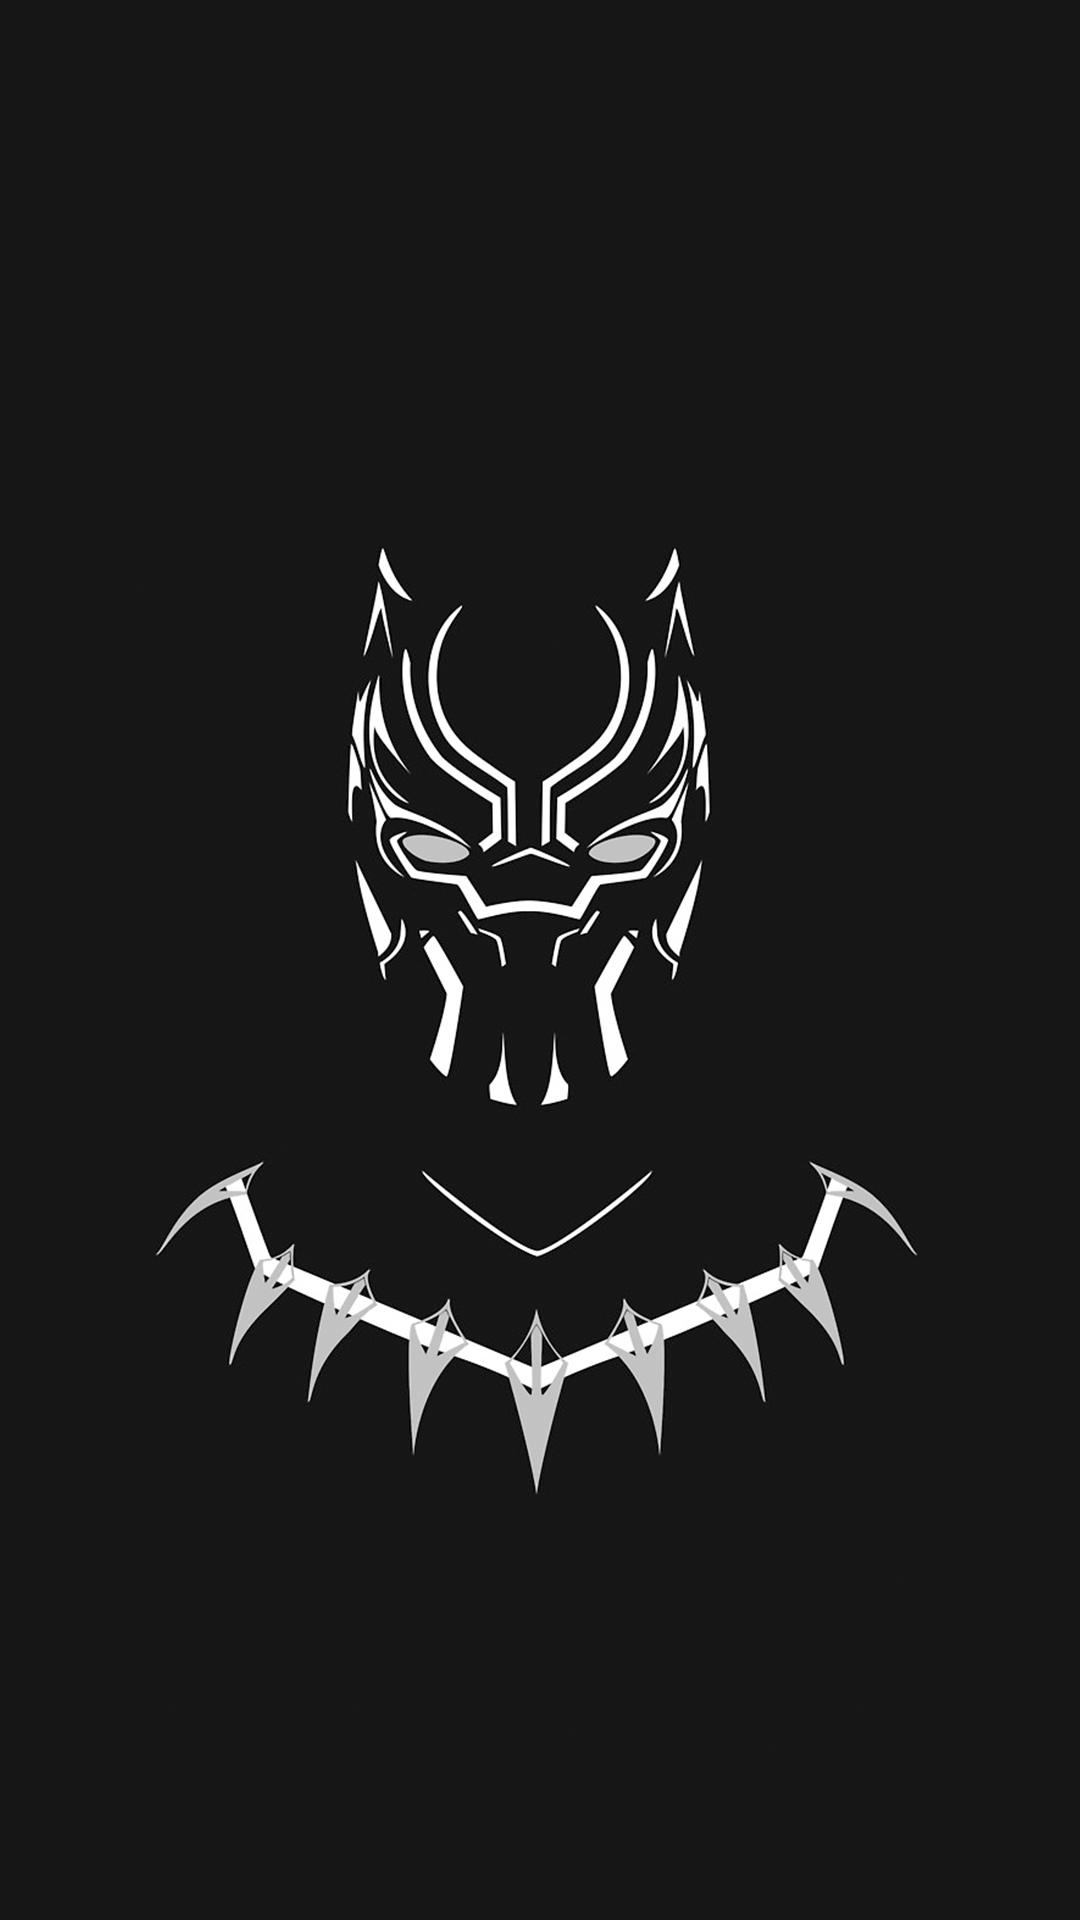 Black Panther Wakanda Forever Wallpapers  Top Free Black Panther Wakanda  Forever Backgrounds  Wallpap  Black panther marvel Black panther  tattoo Black panther